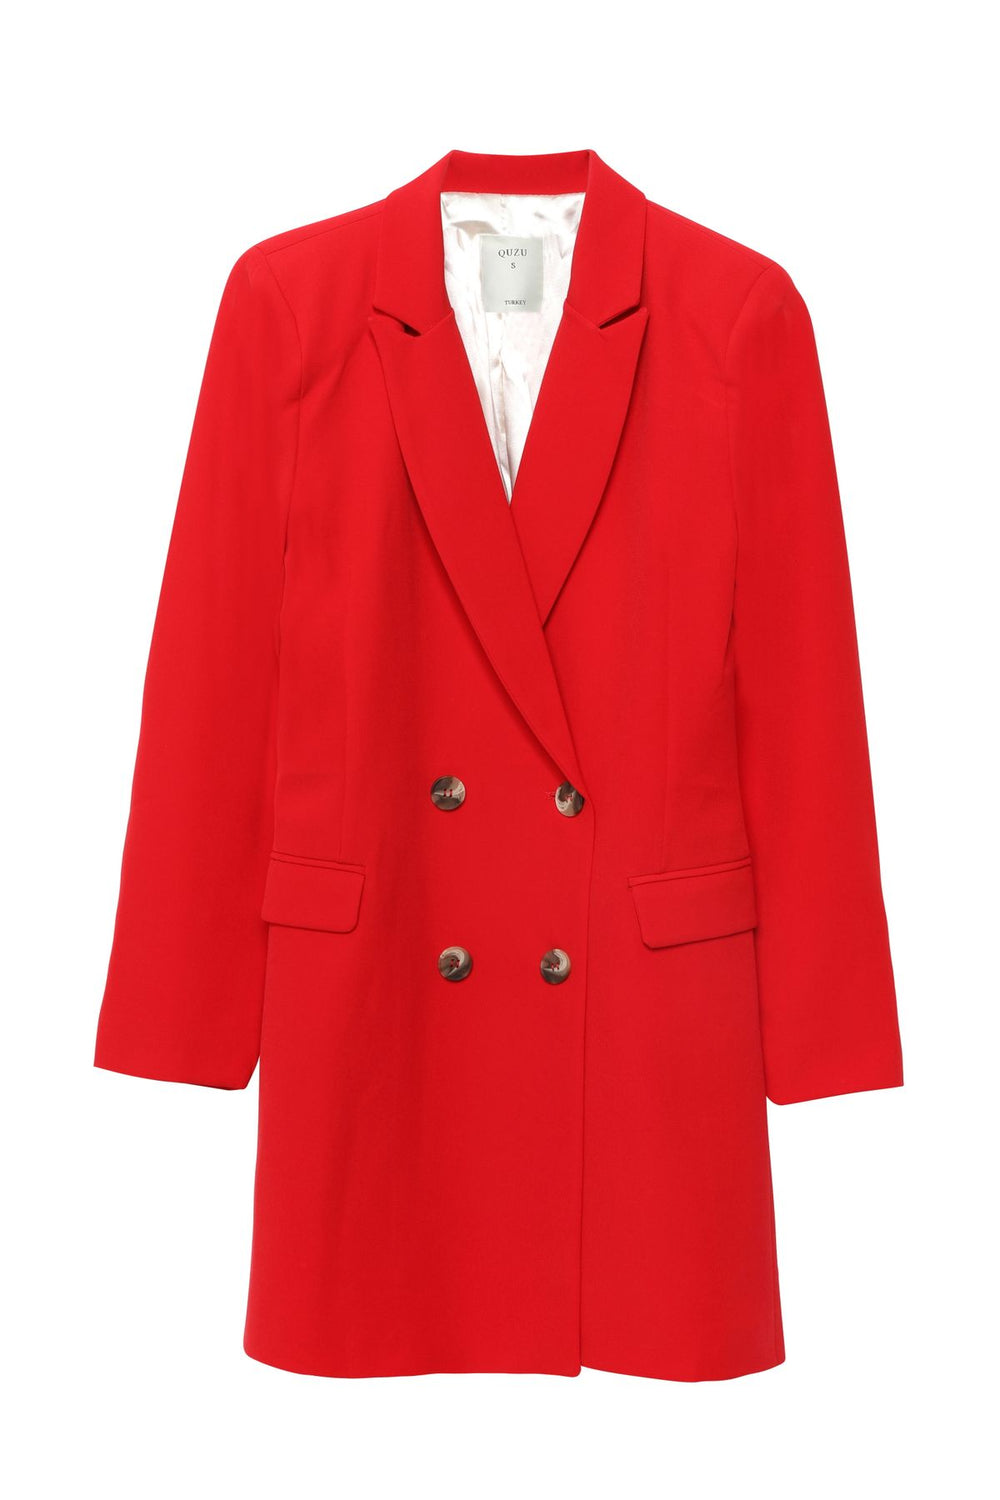 Double Breasted Collar Jacket Dress Red